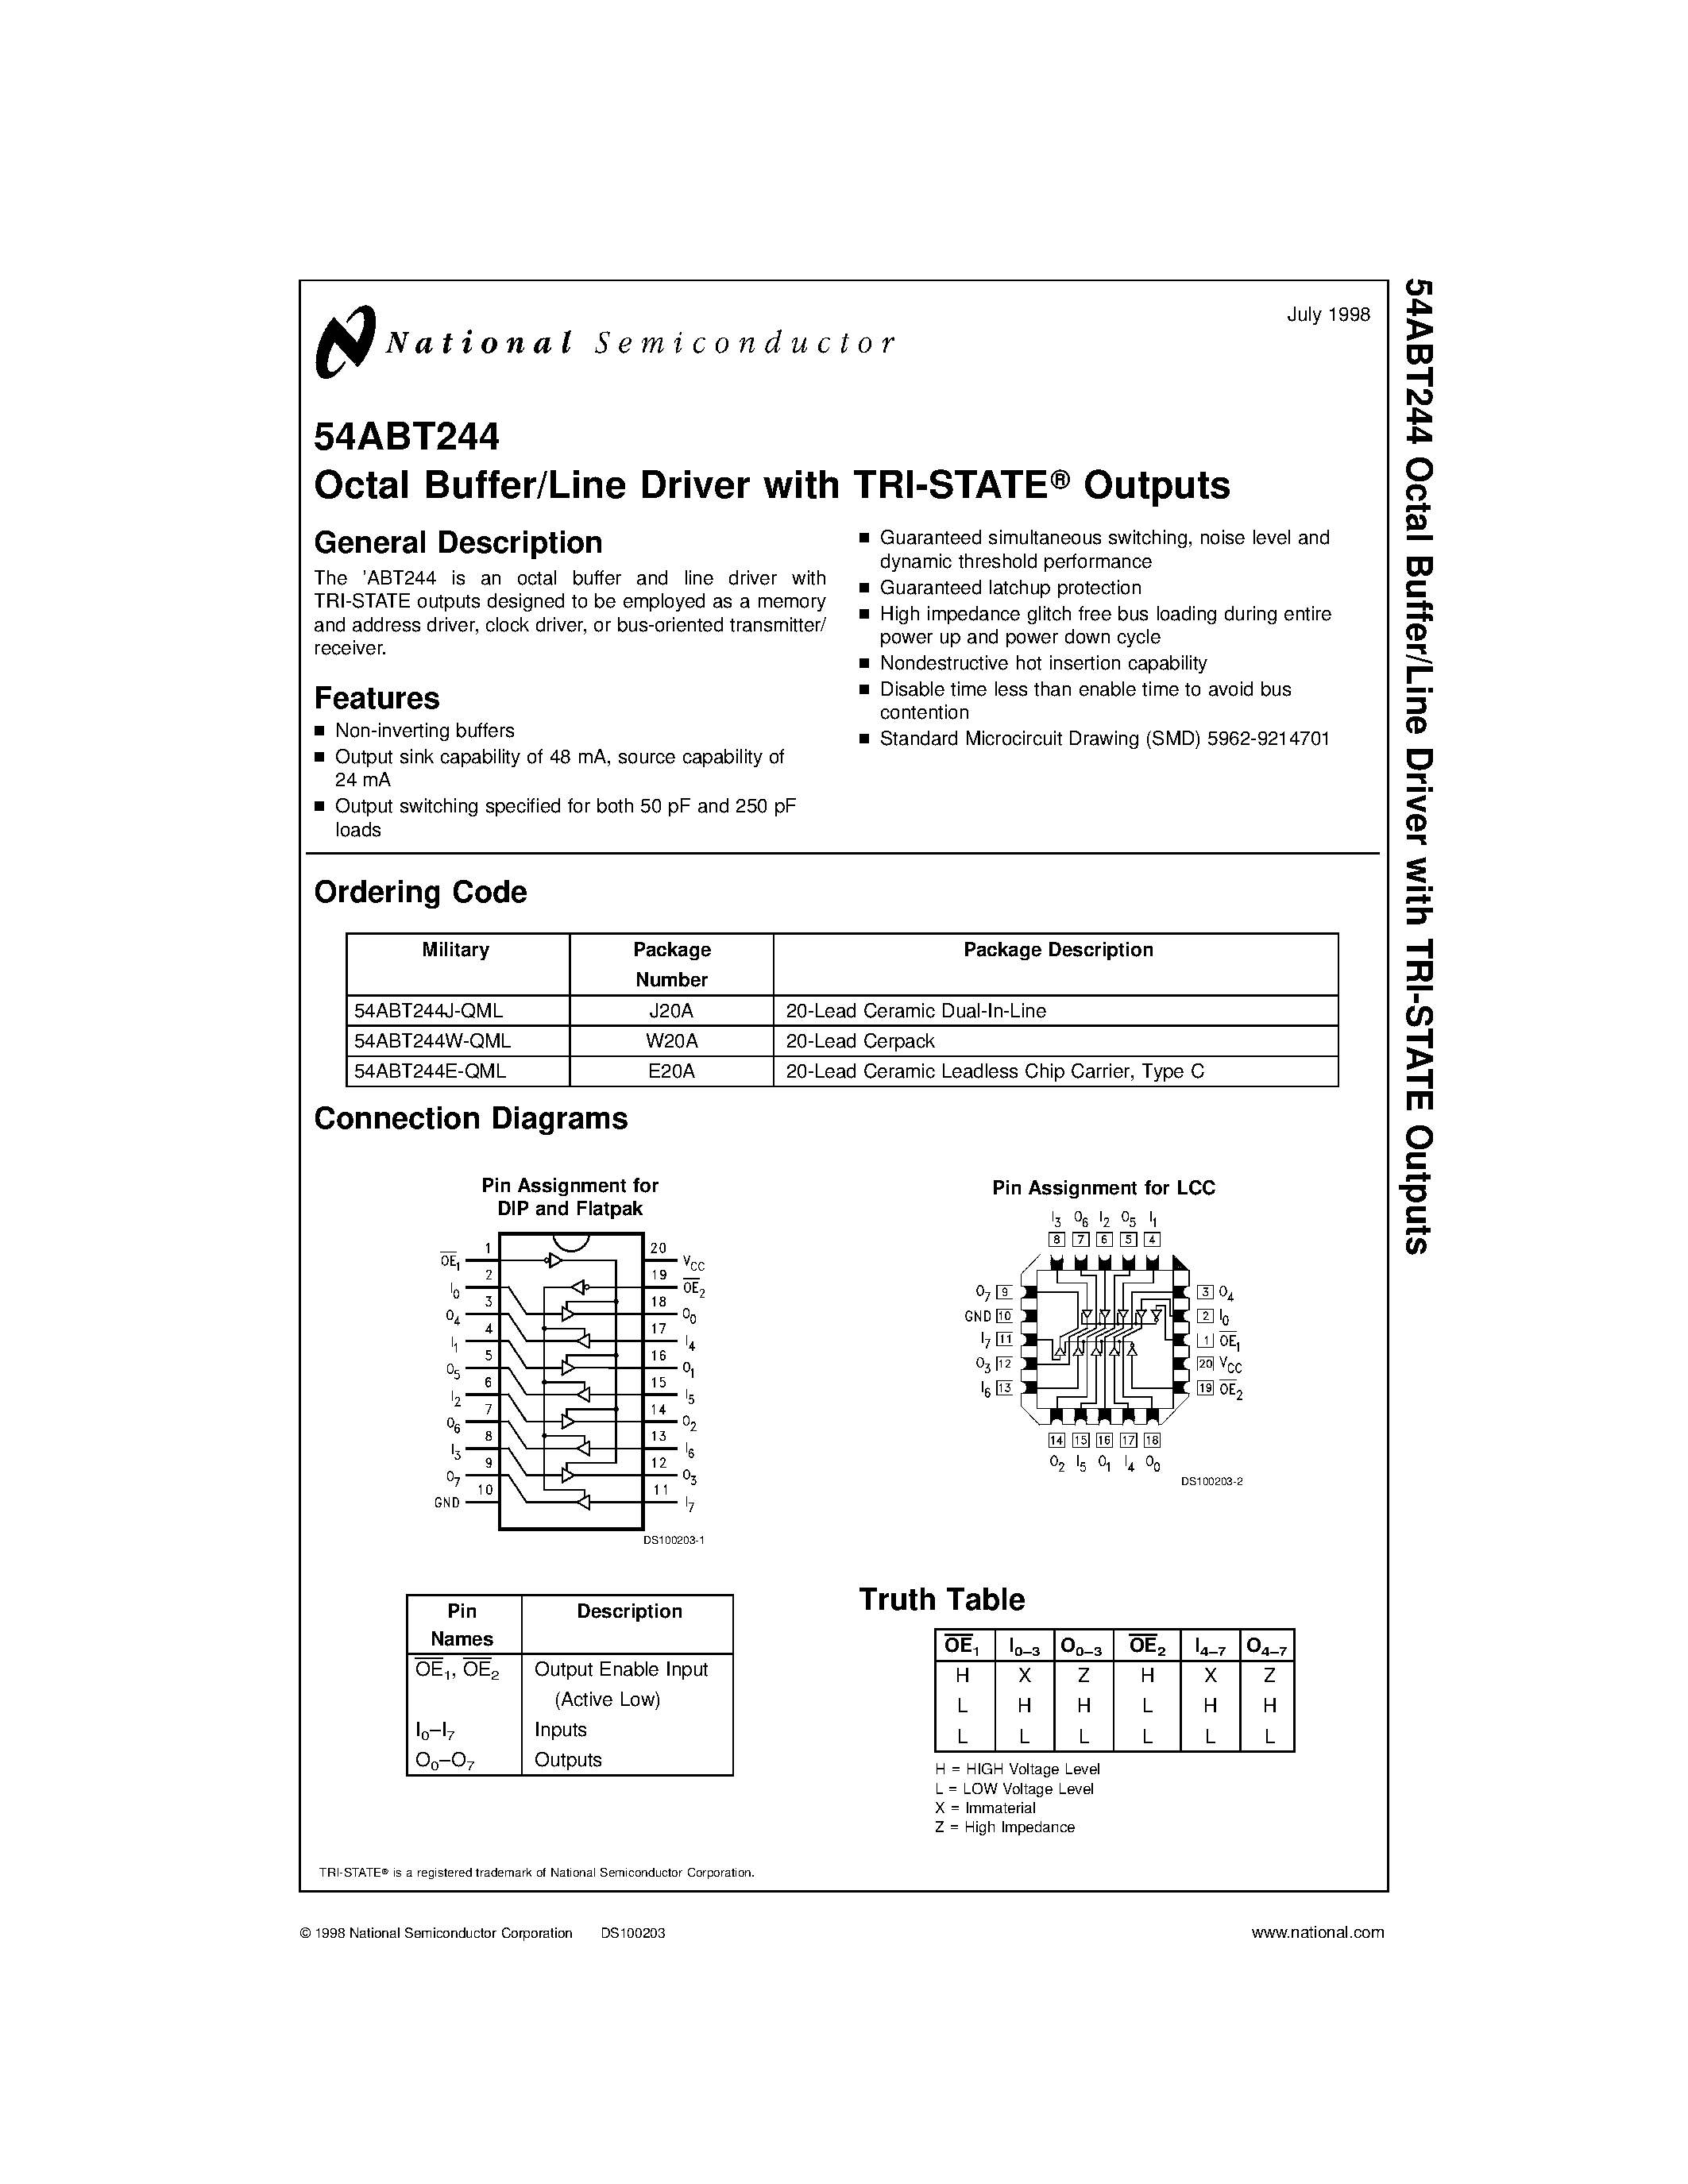 Datasheet 54ABT244J-QML - Octal Buffer/Line Driver with TRI-STATE Outputs page 1